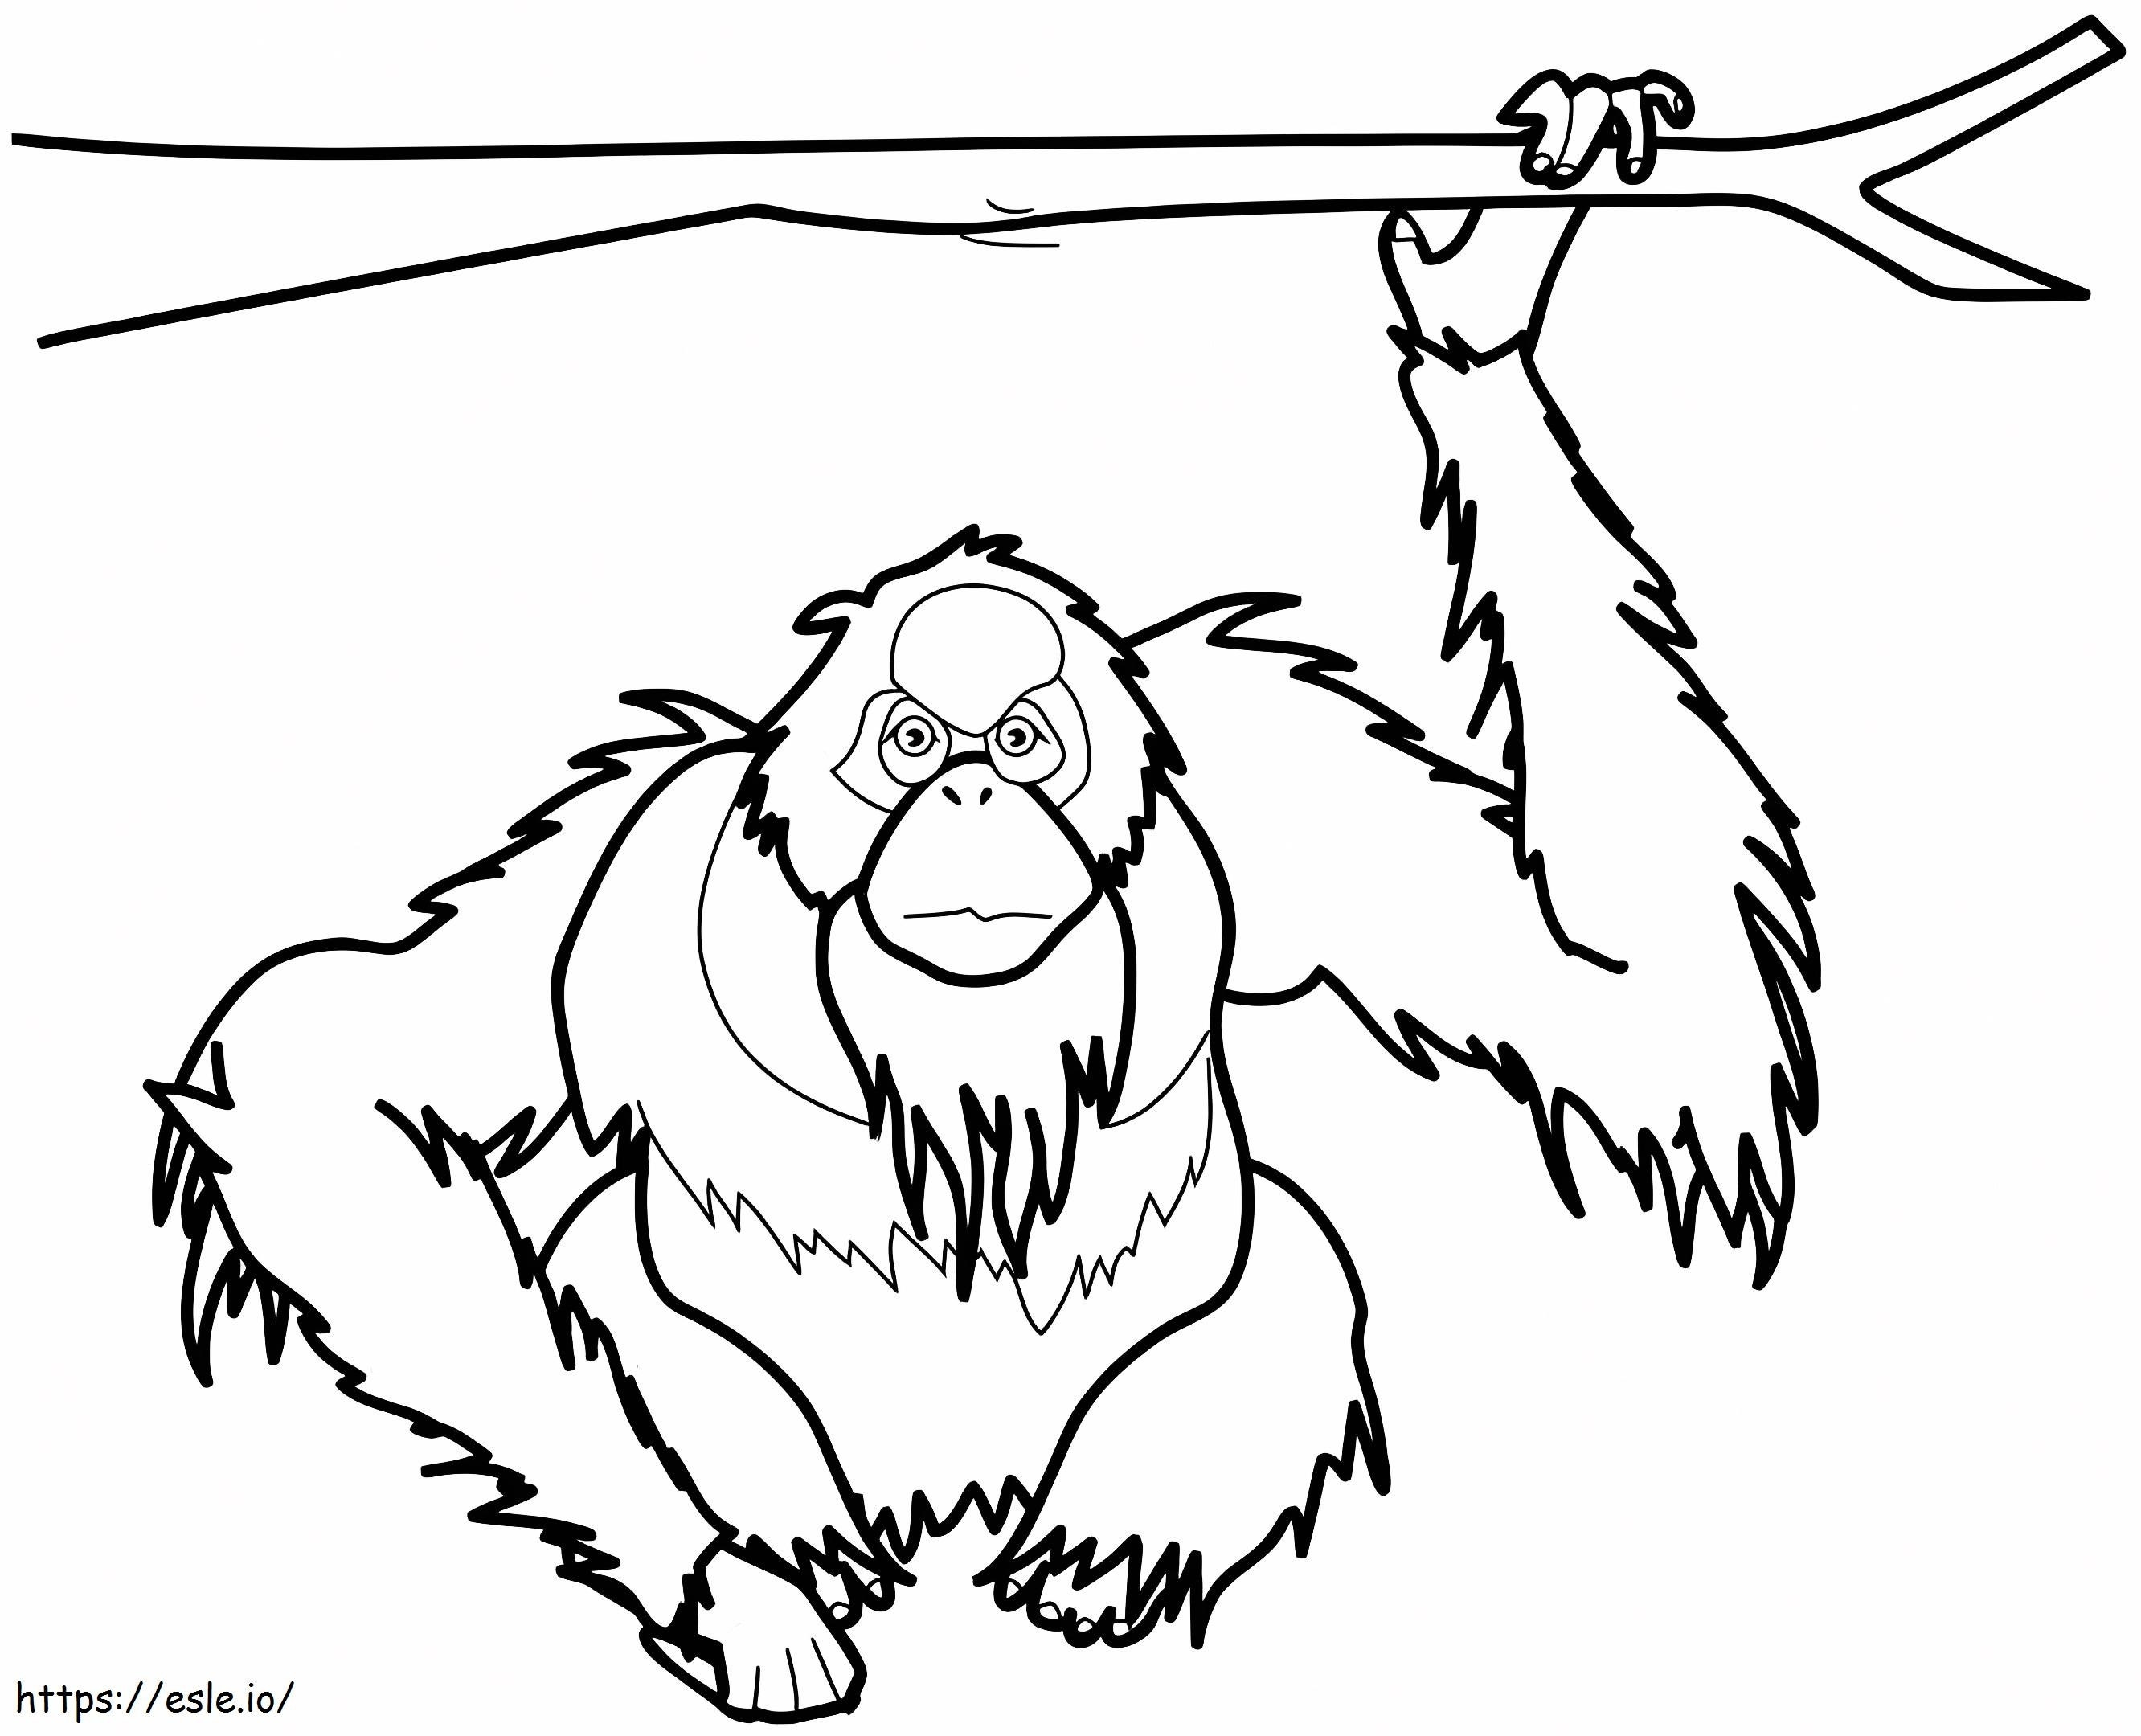 Tailless Monkey Holding A Tree Branch coloring page